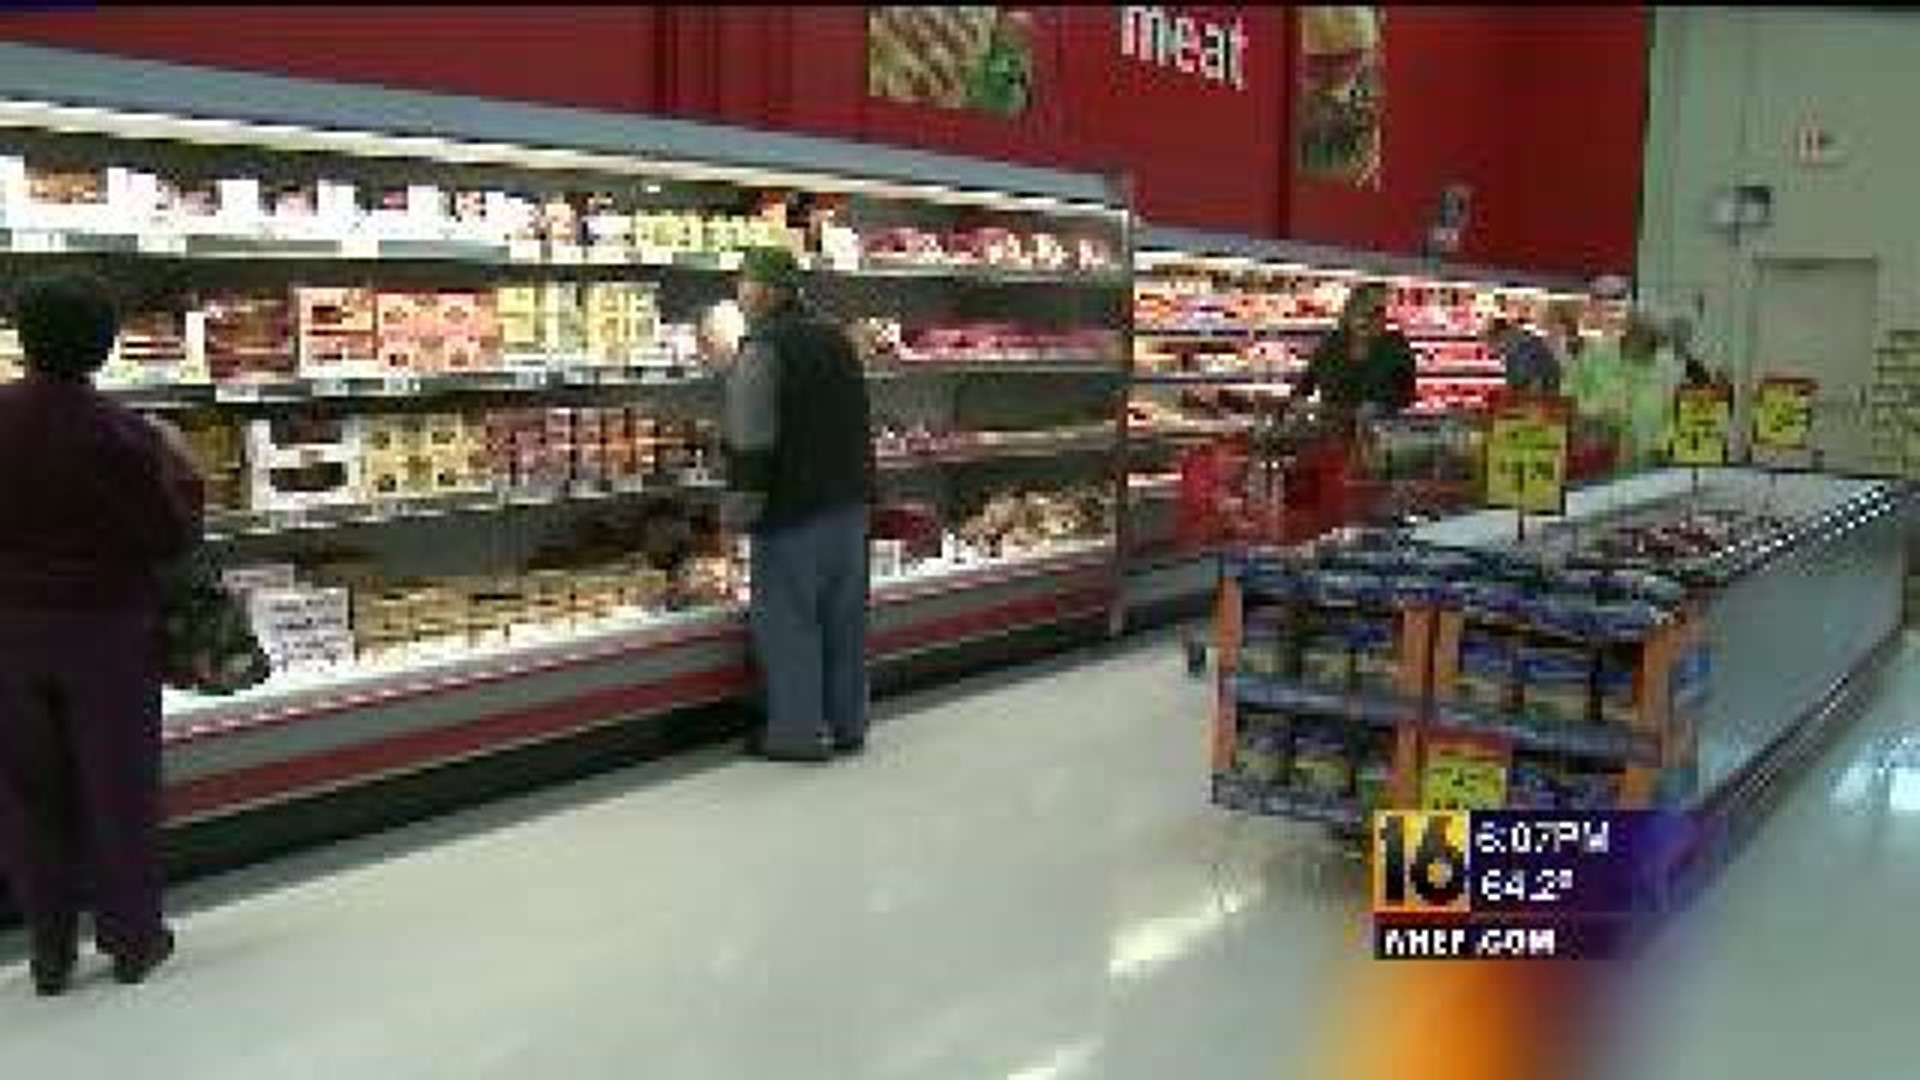 New Grocery Store Opens in Wilkes-Barre